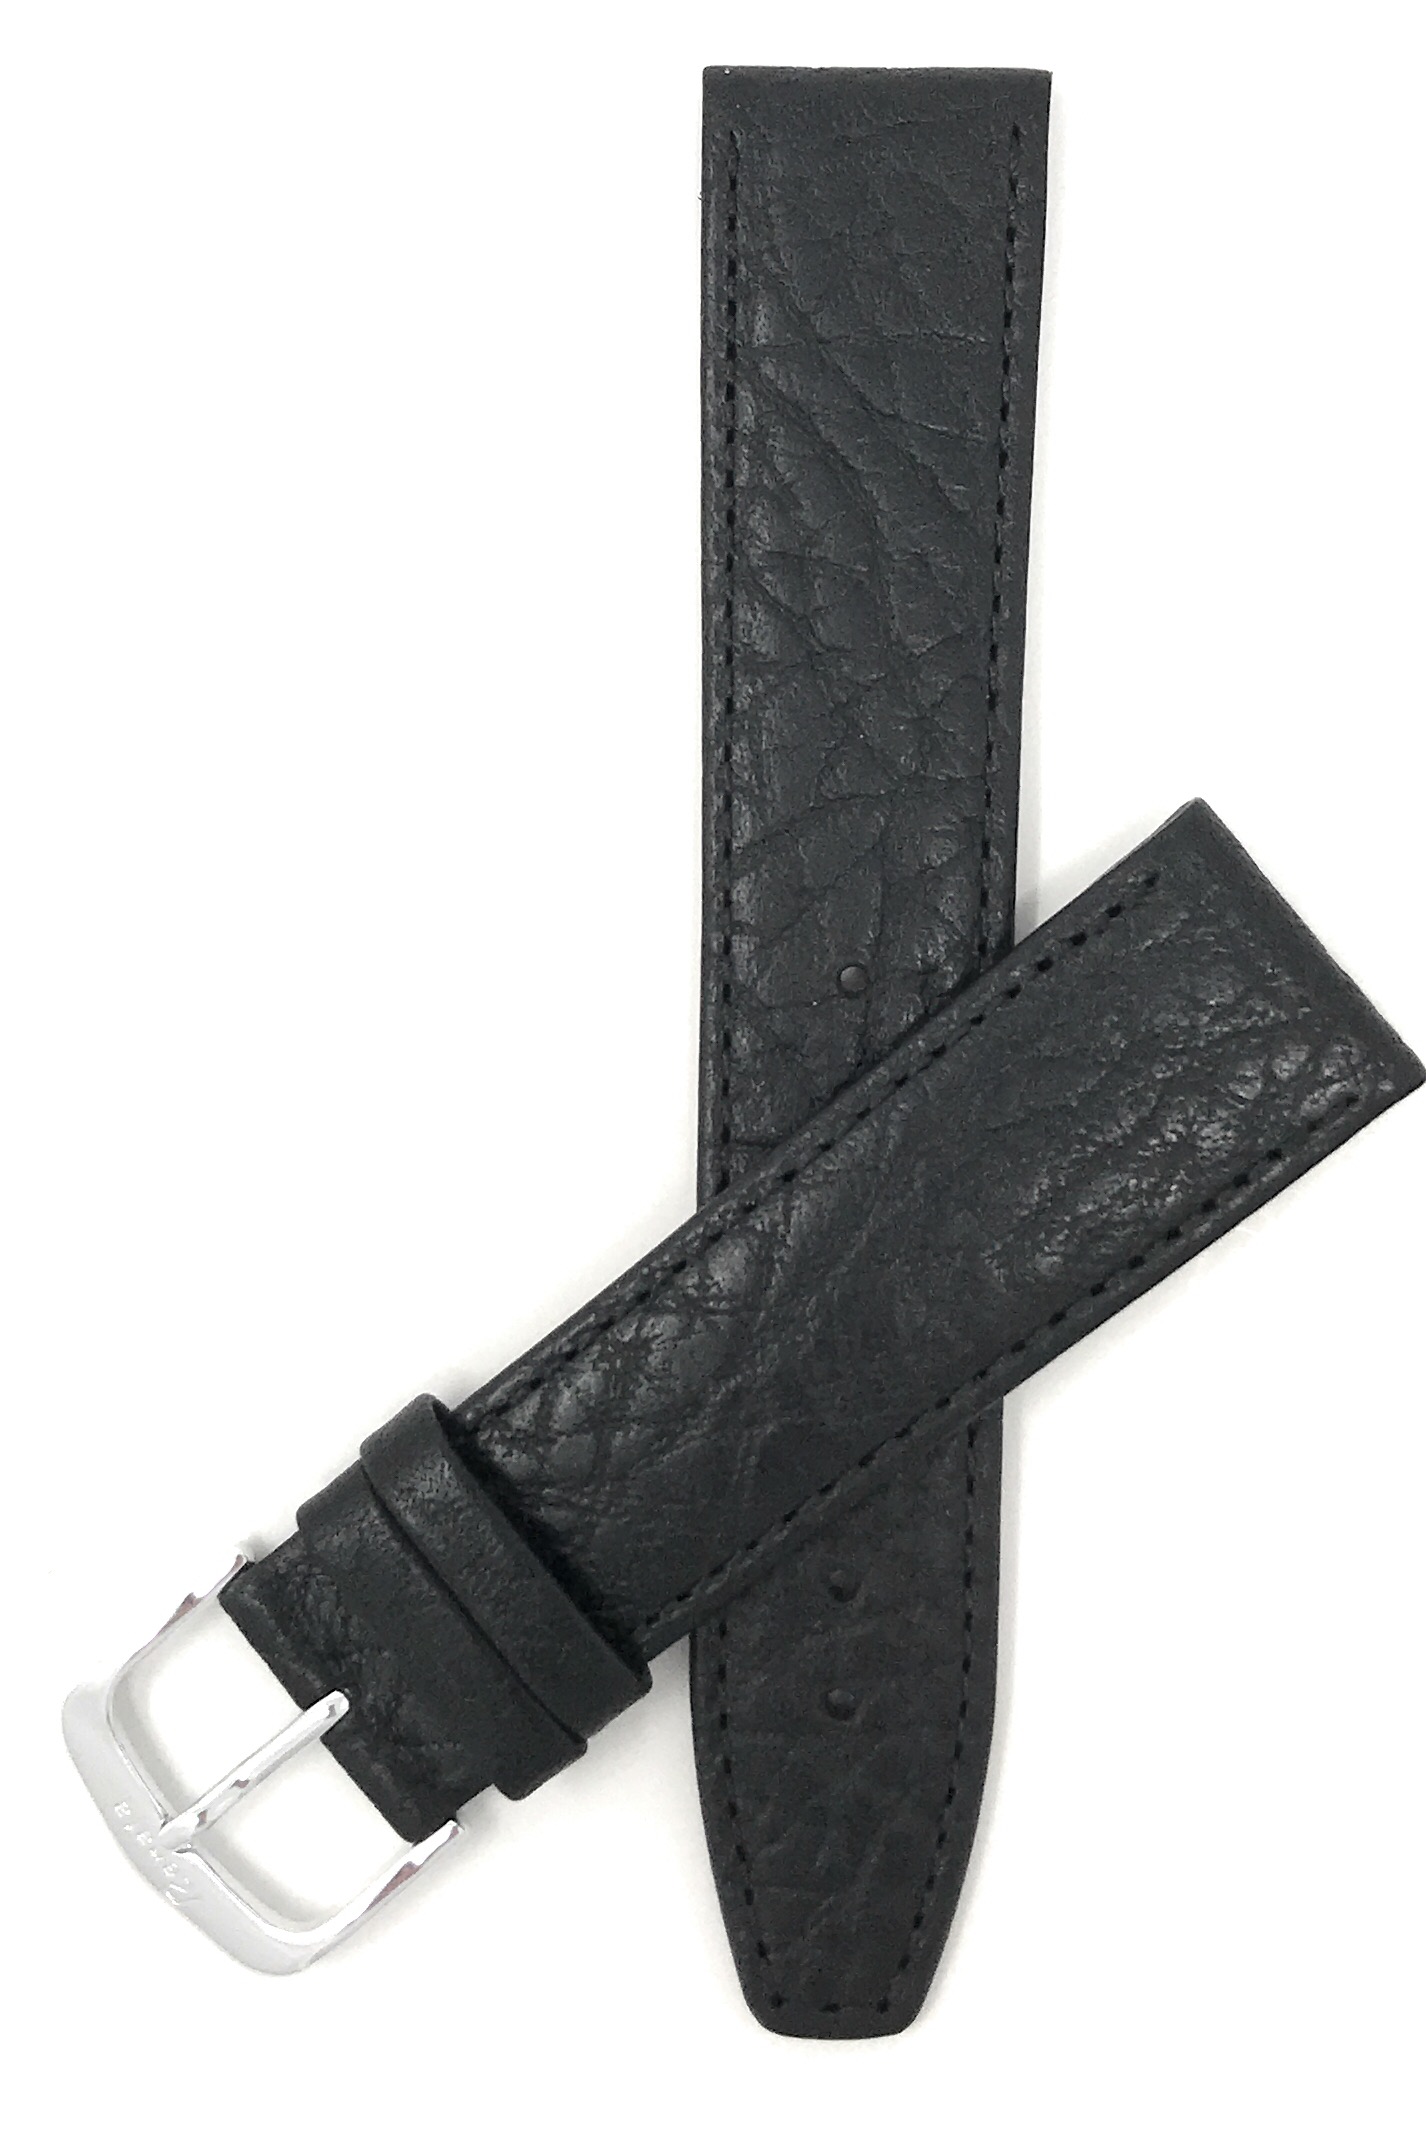 Bandini Watch Band, Leather Strap, Grained Pattern, 8mm - 20mm Extra ...